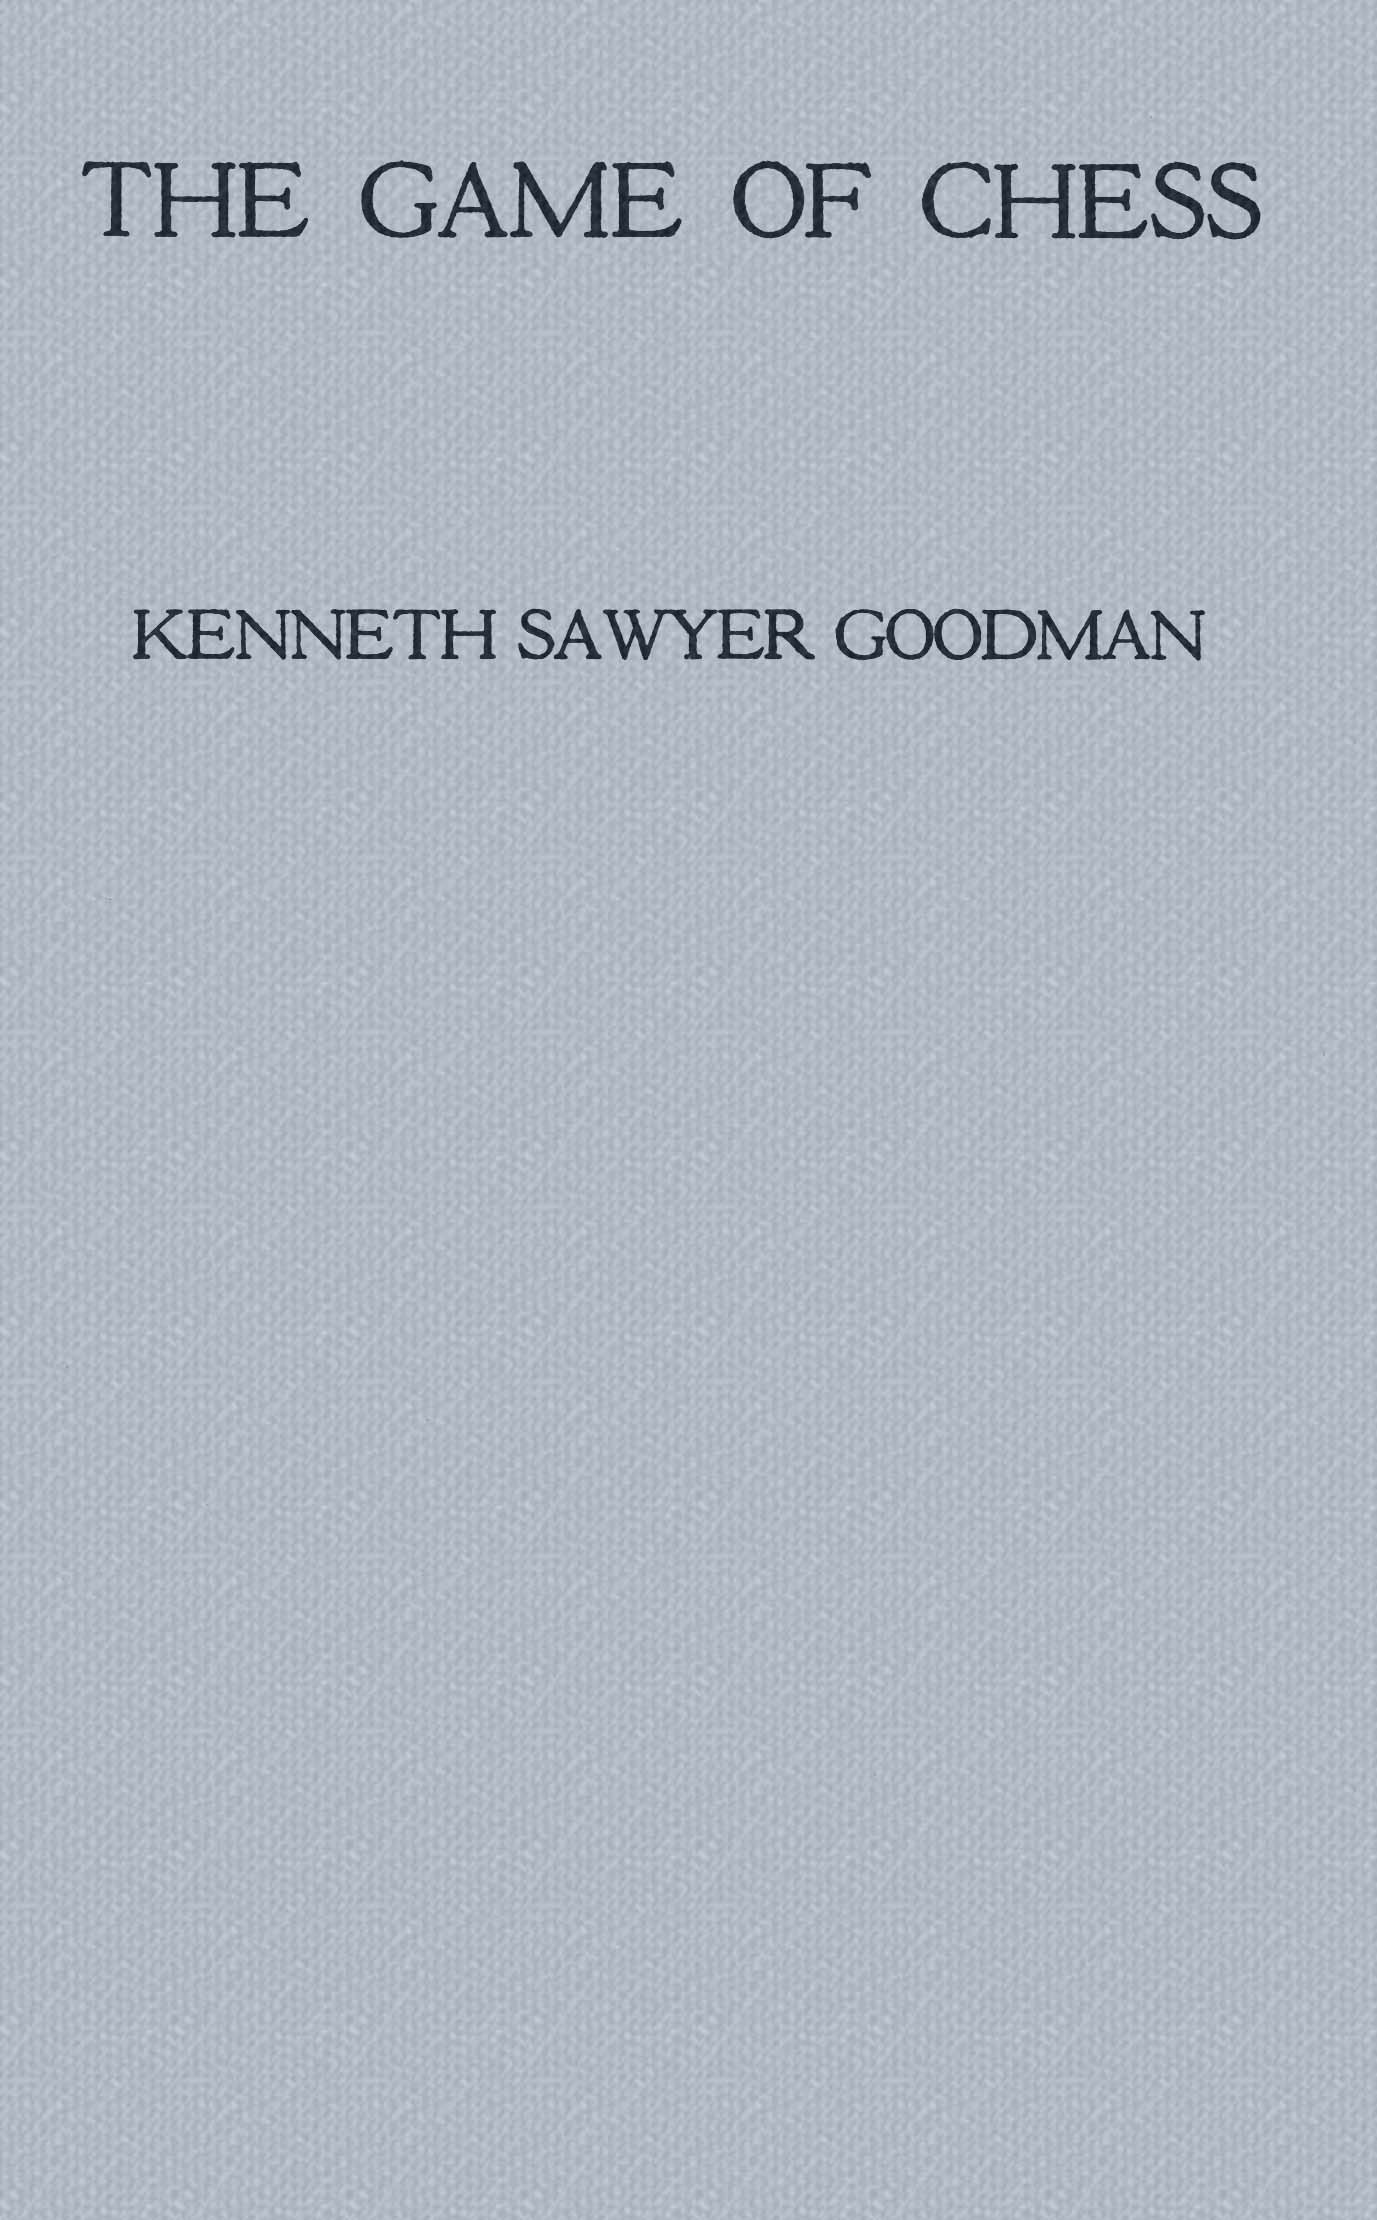 The Game of Chess, by Kenneth Sawyer Goodman—A Project Gutenberg eBook